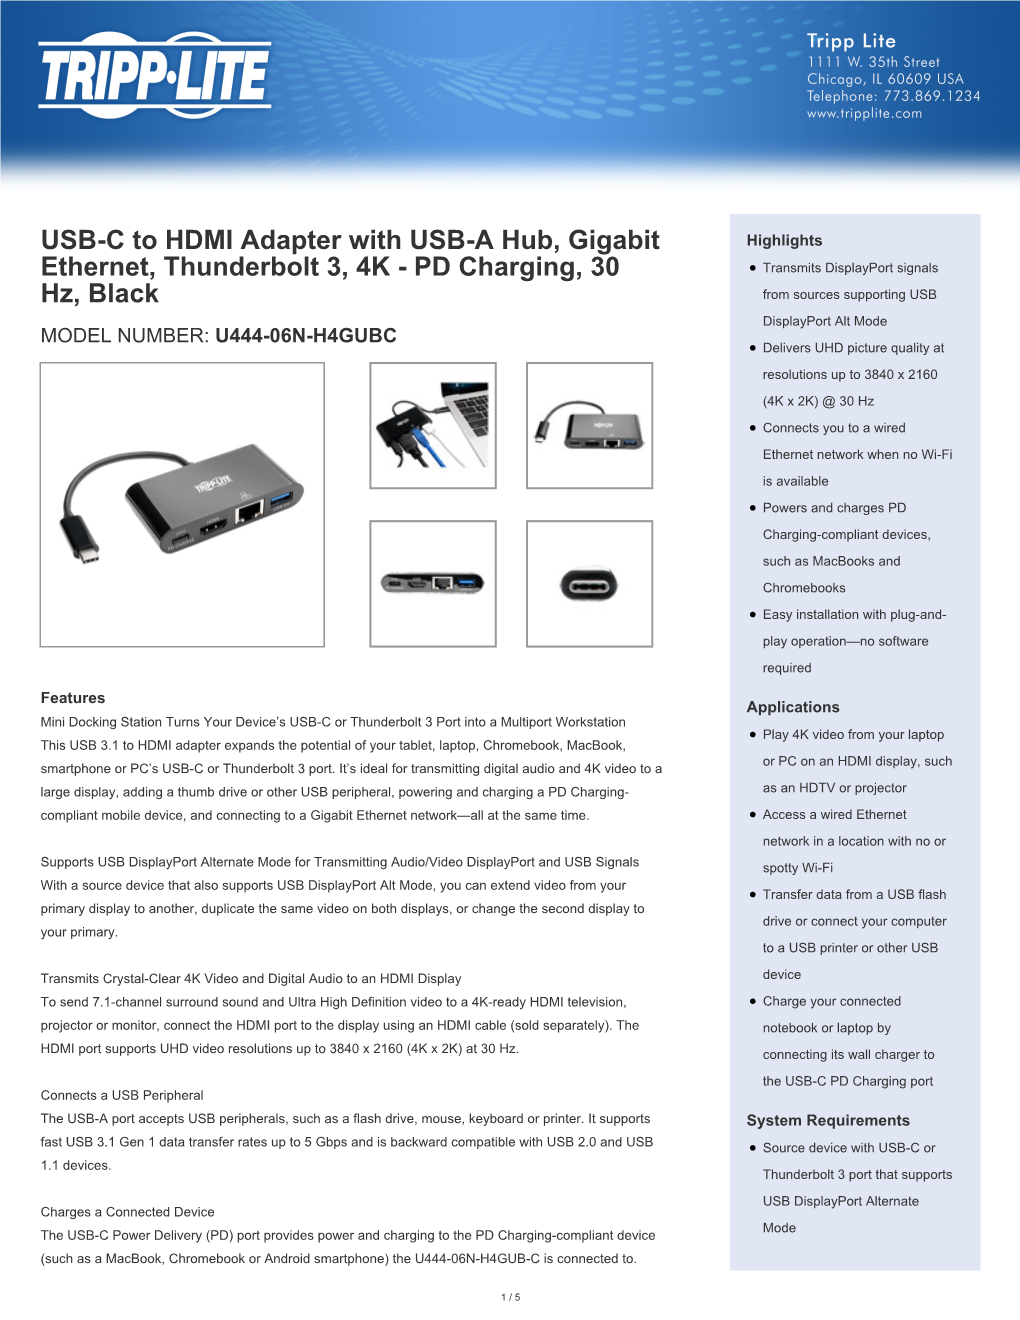 USB-C to HDMI Adapter with USB-A Hub, Gigabit Ethernet